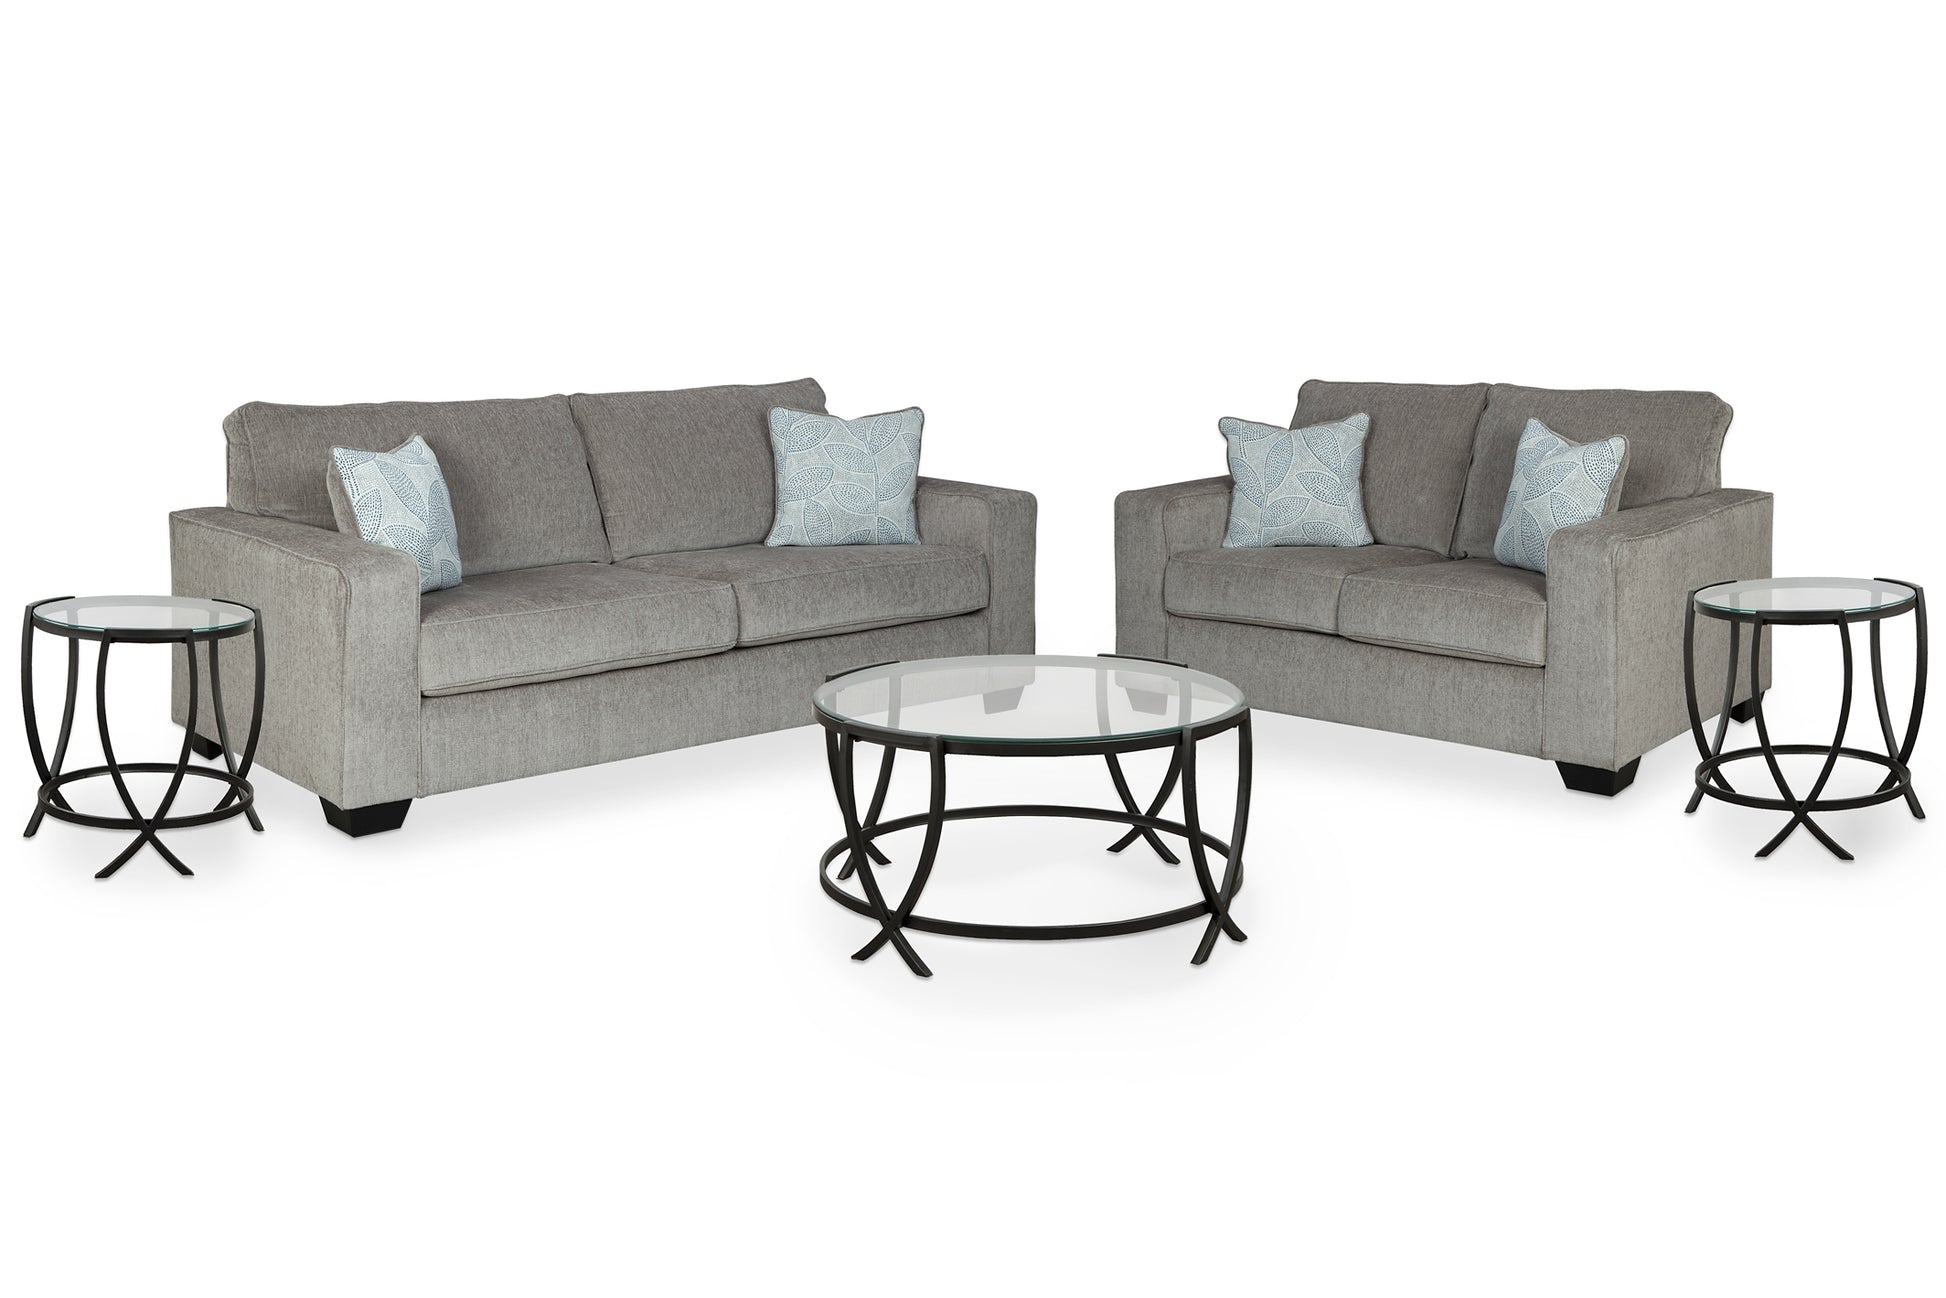 Altari Sofa and Loveseat with Coffee Table and 2 End Tables Wilson Furniture (OH)  in Bridgeport, Ohio. Serving Bridgeport, Yorkville, Bellaire, & Avondale